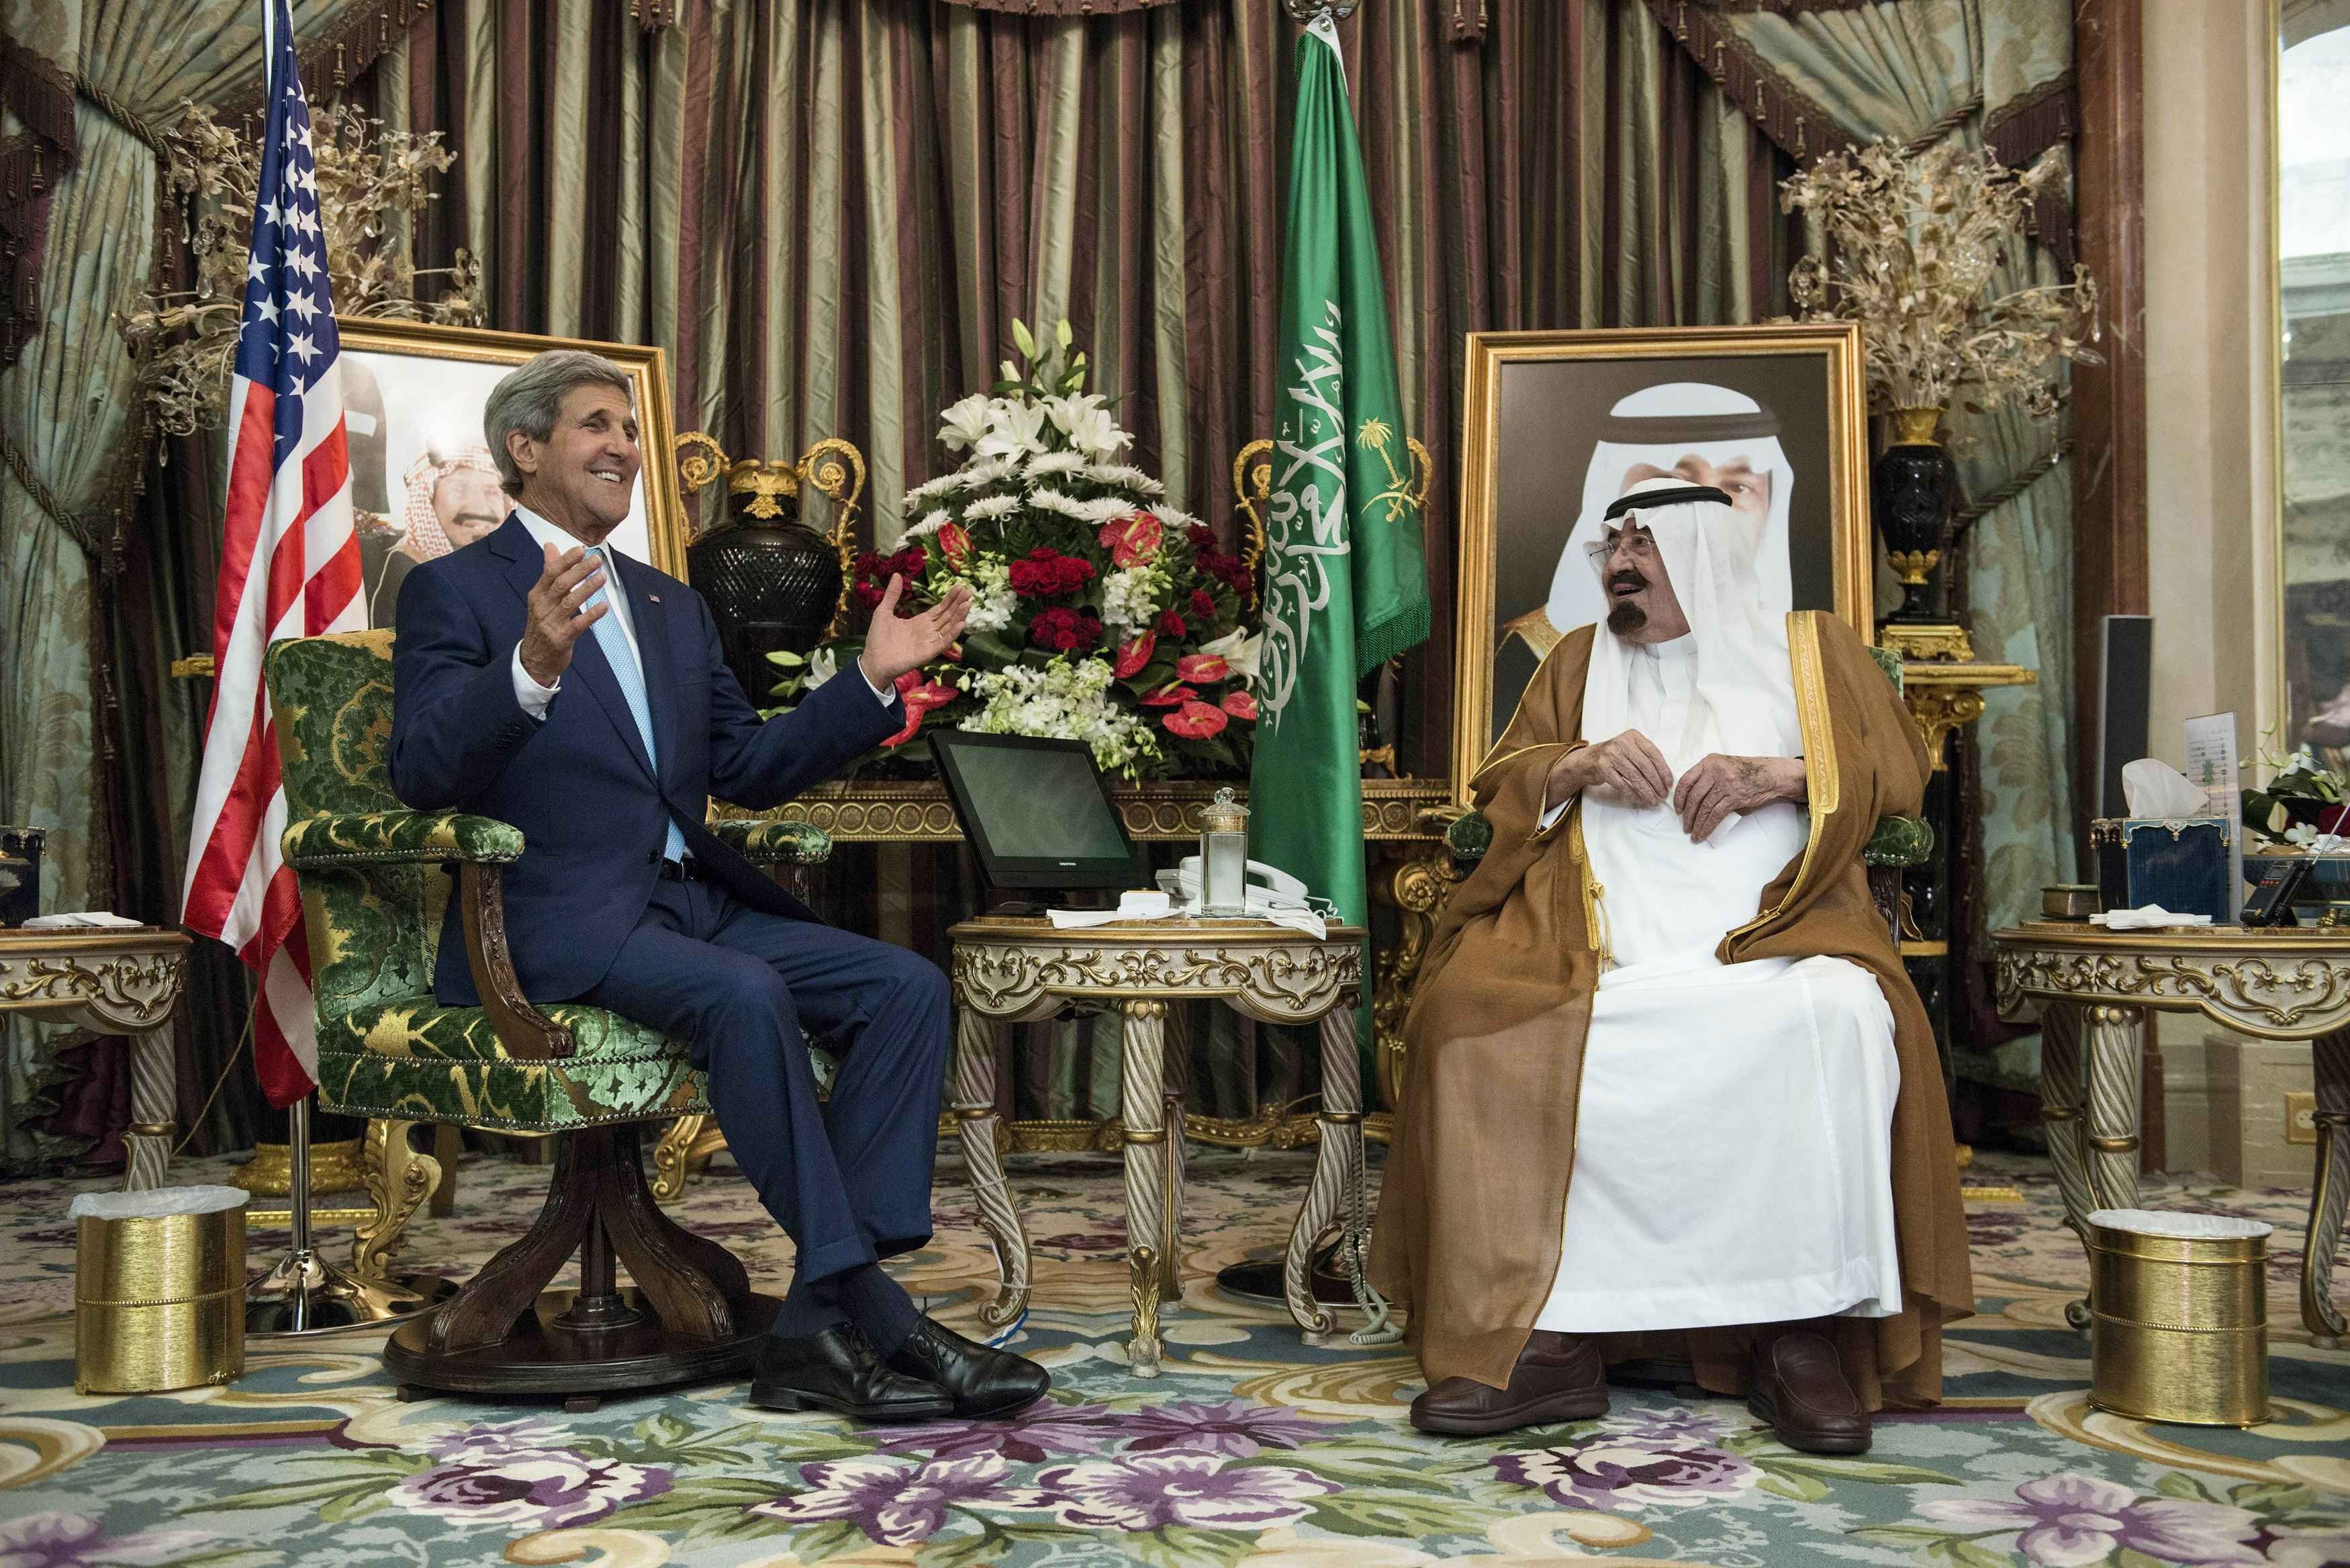 Saudi King Abdullah listens to U.S. Secretary of State Kerry before a meeting at the Royal Palace in Jeddah